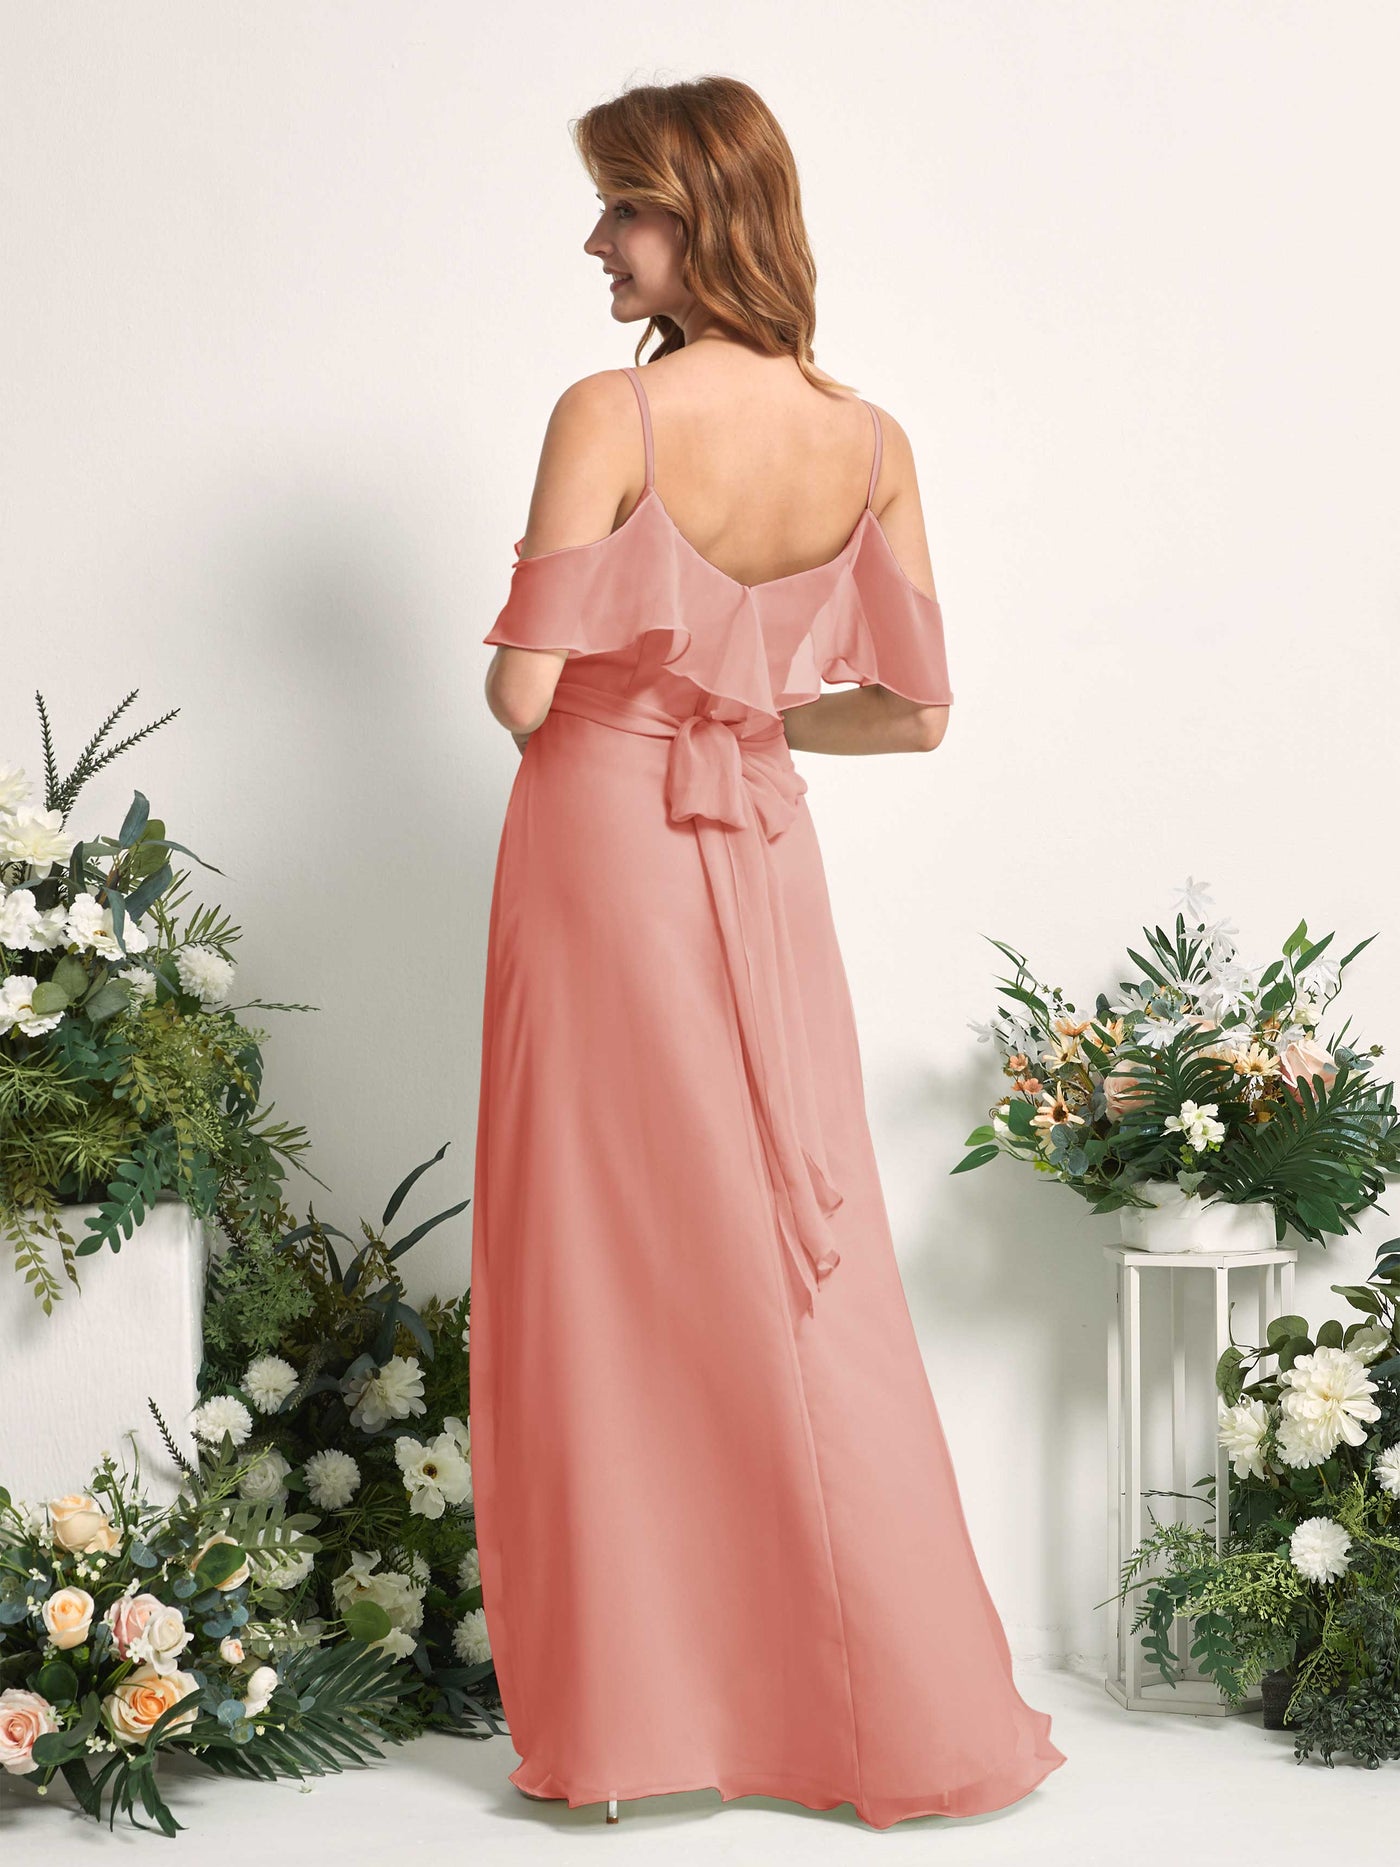 Bridesmaid Dress A-line Chiffon Spaghetti-straps Full Length Sleeveless Wedding Party Dress - Champagne Rose (81227406)#color_champagne-rose